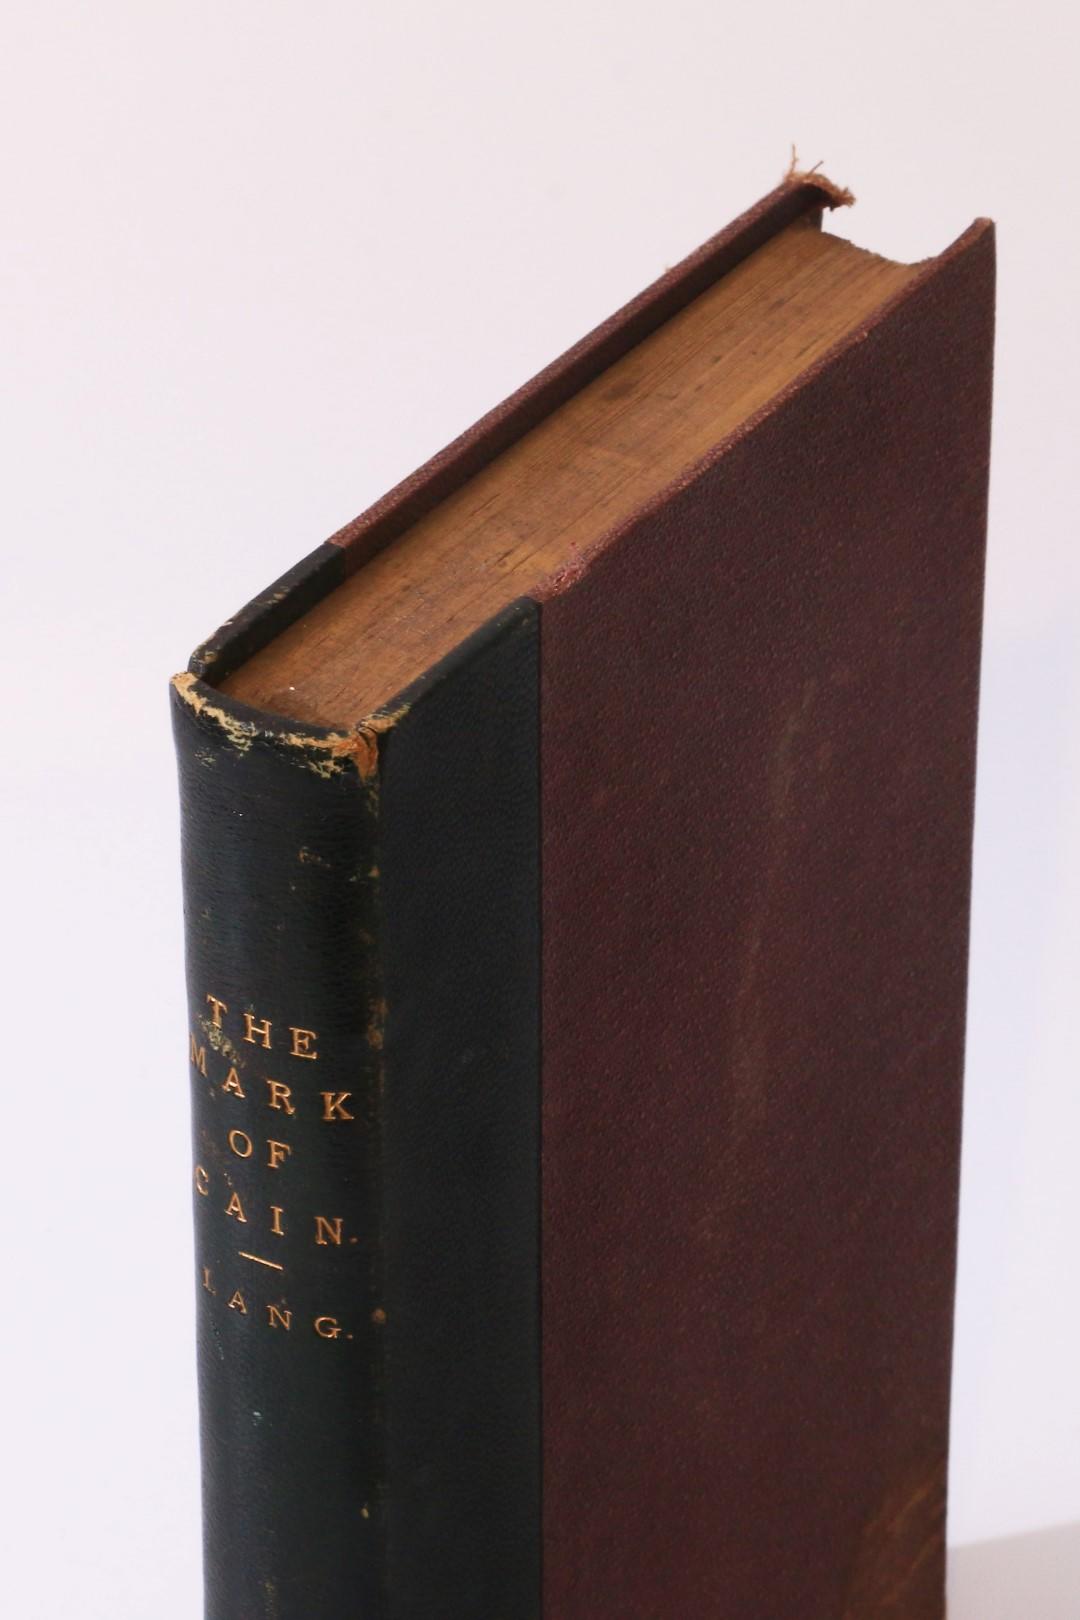 Andrew Lang - The Mark of Cain - J.W. Arrowsmith, 1886, First Edition.